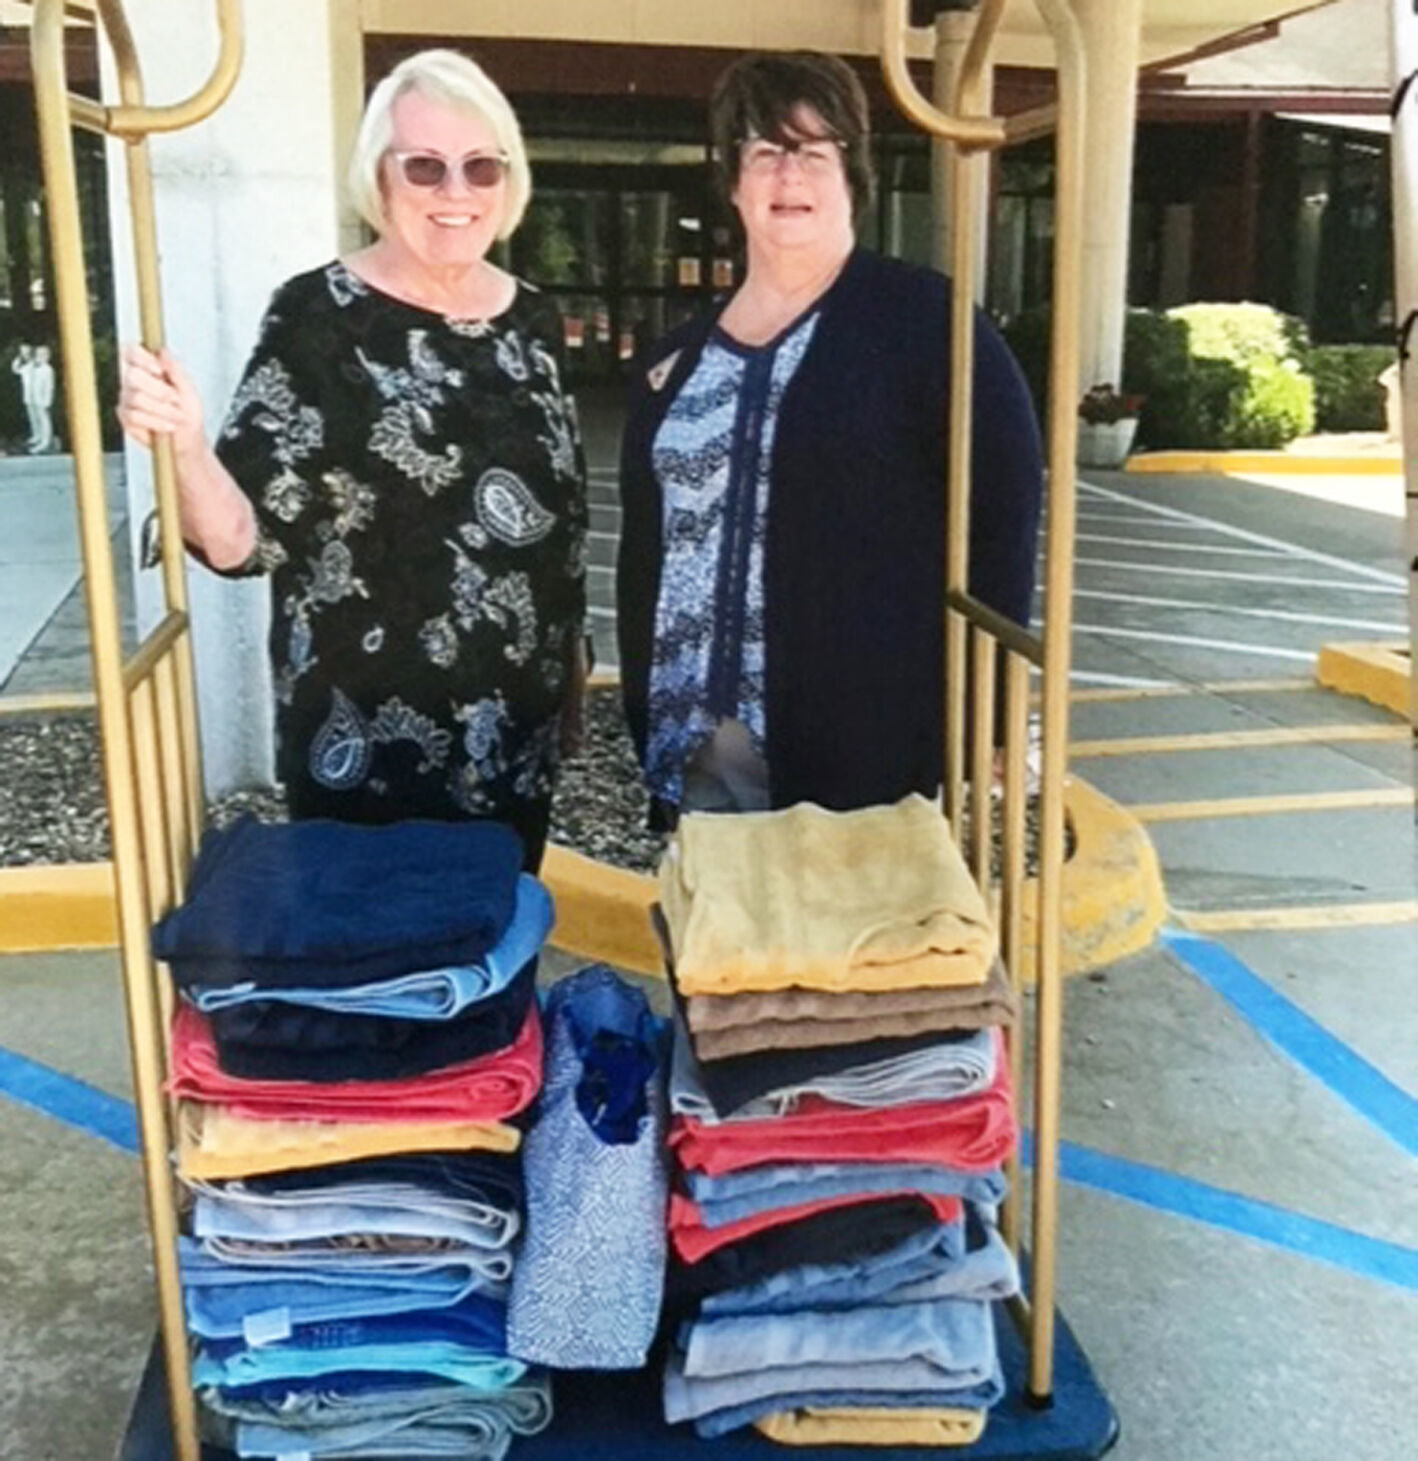 Mary Ann Farmer presents the lap robes to Kathy Winkelman of the Mexico Veterans Home.